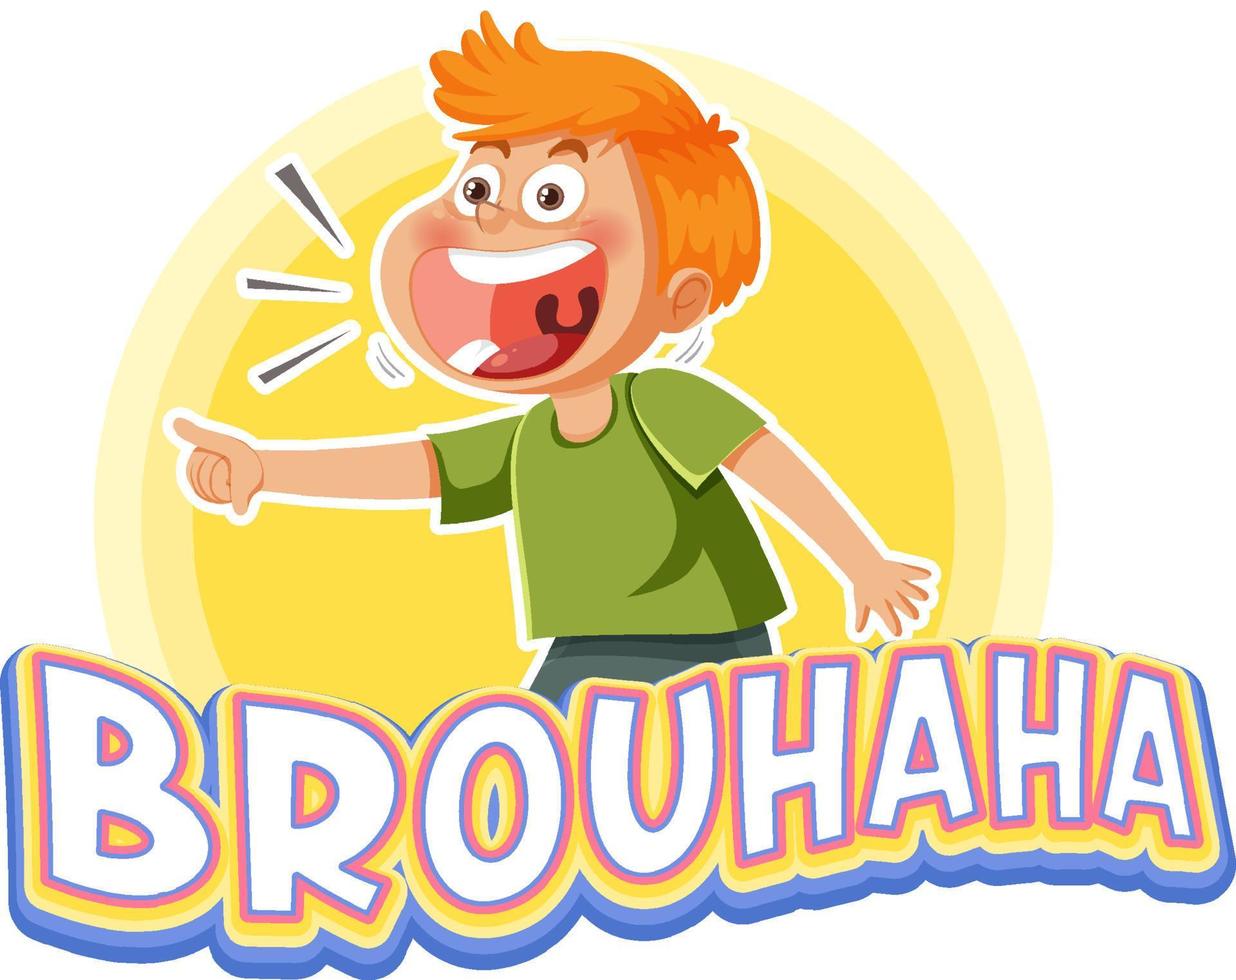 Laughing cartoon character with word expression vector